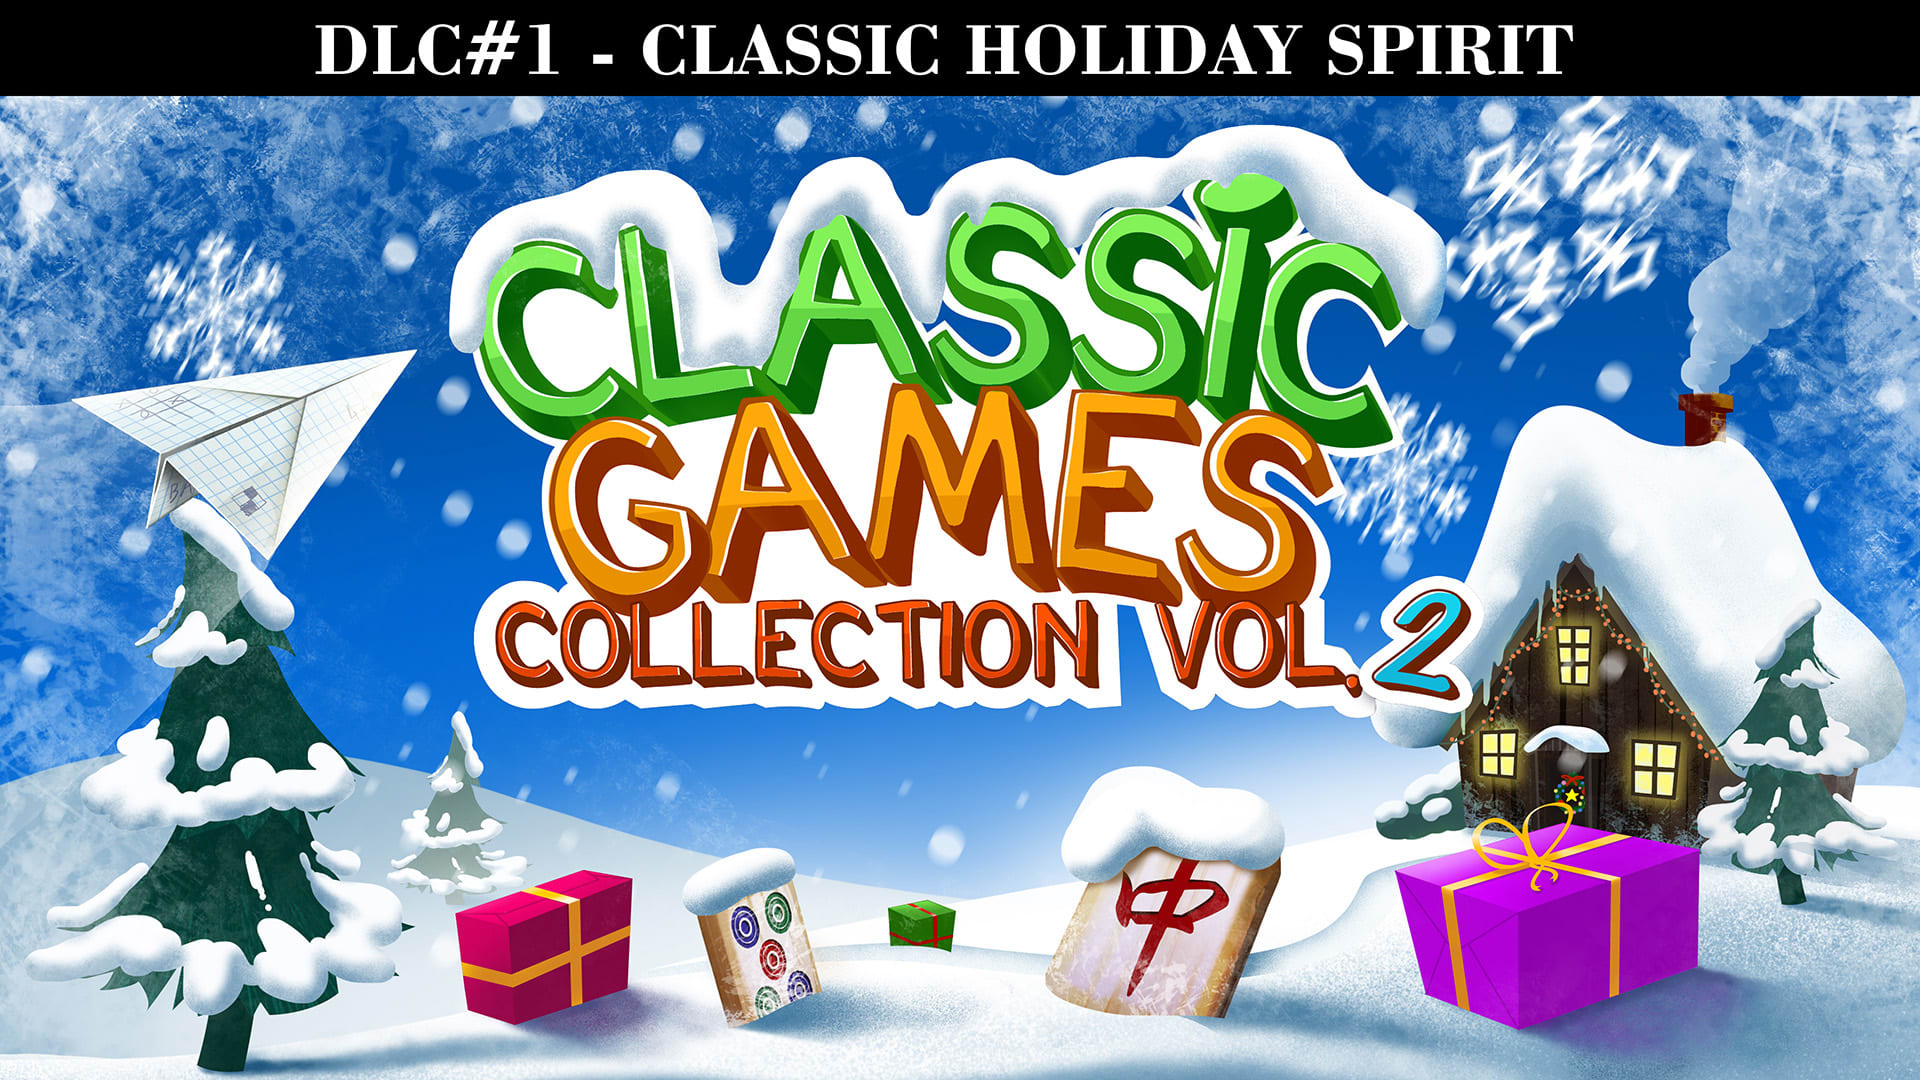 Classic Games Collection Vol.2 DLC#1 - Classic Holiday Spirit 1